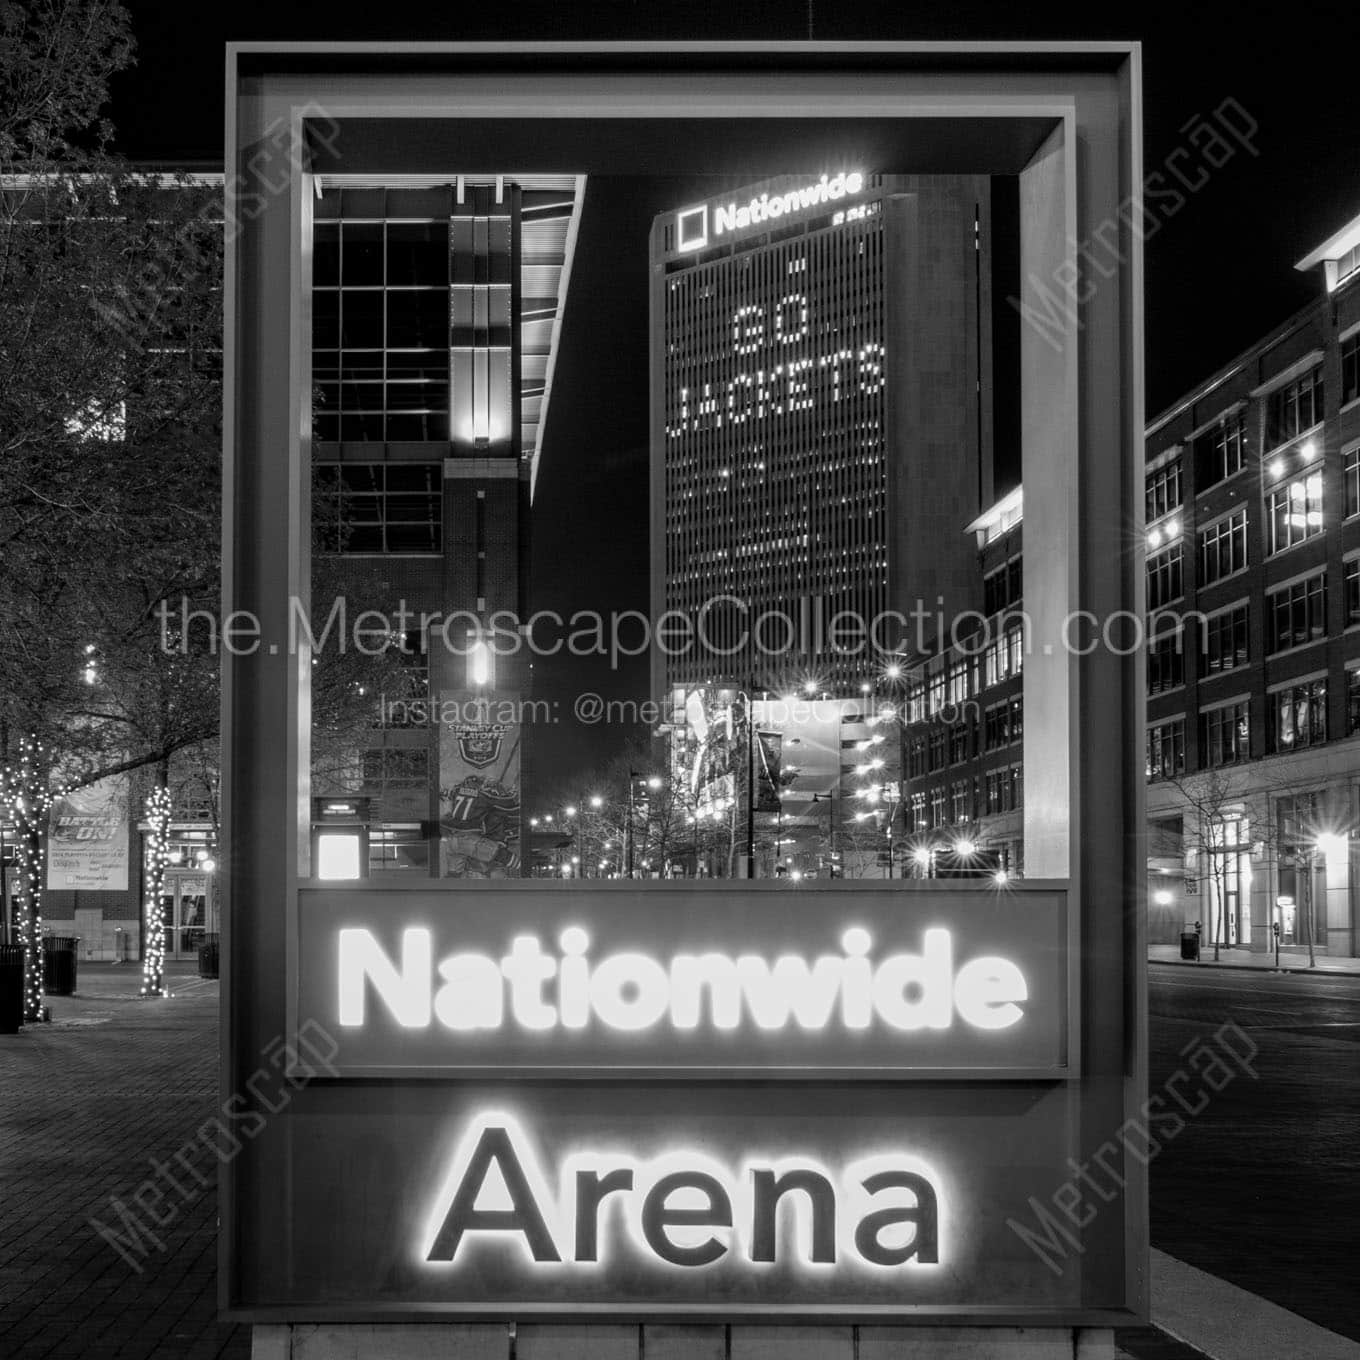 old nationwide arena sign Black & White Office Art